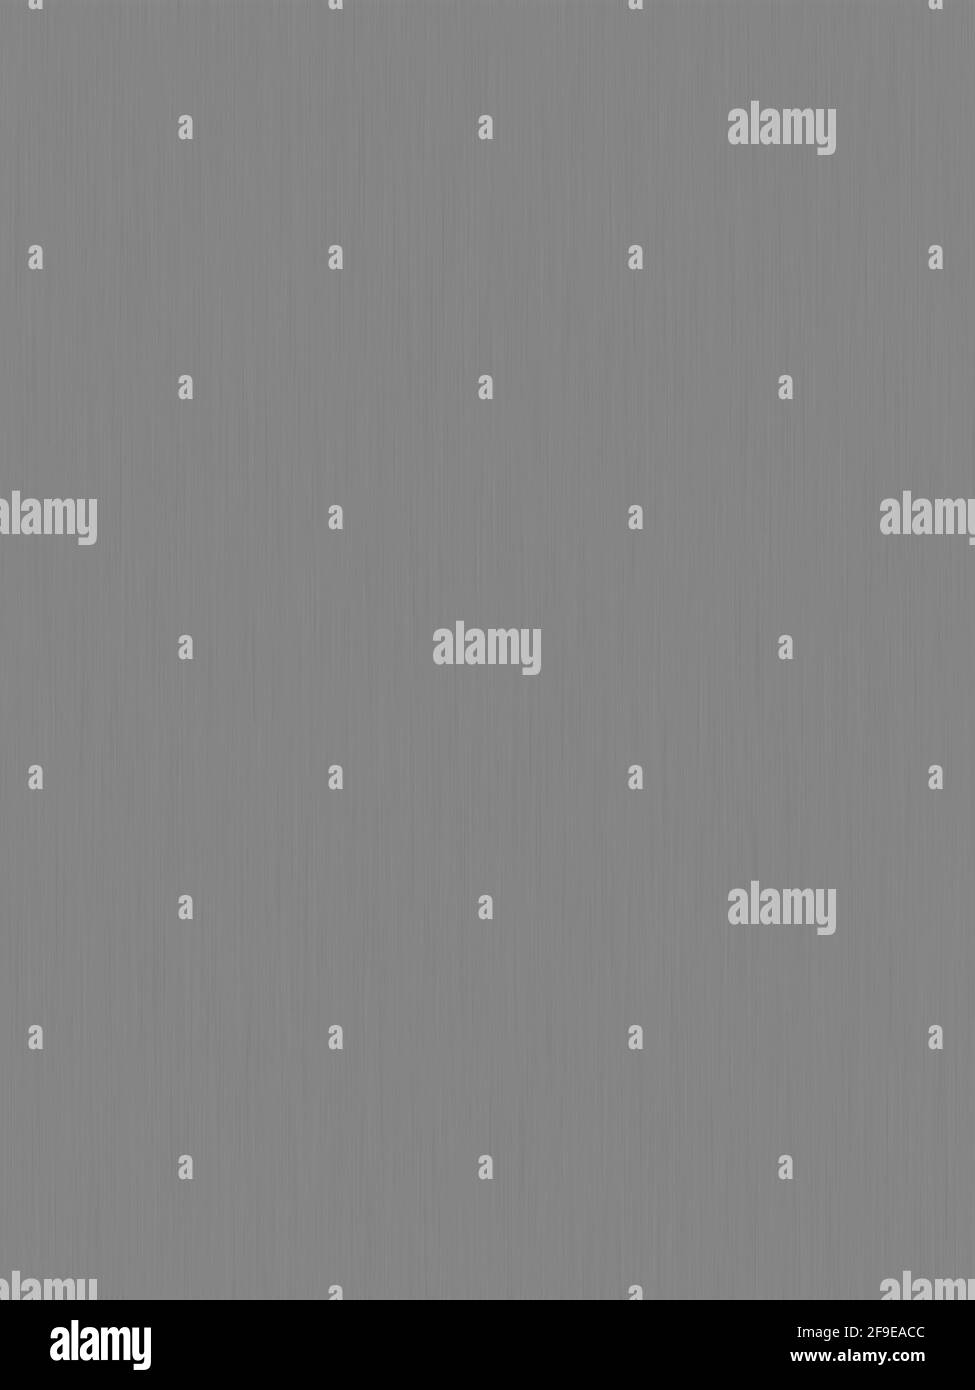 Gray light smooth digital abstract background with straight quasi parallel thin vertical elongated lines Stock Photo